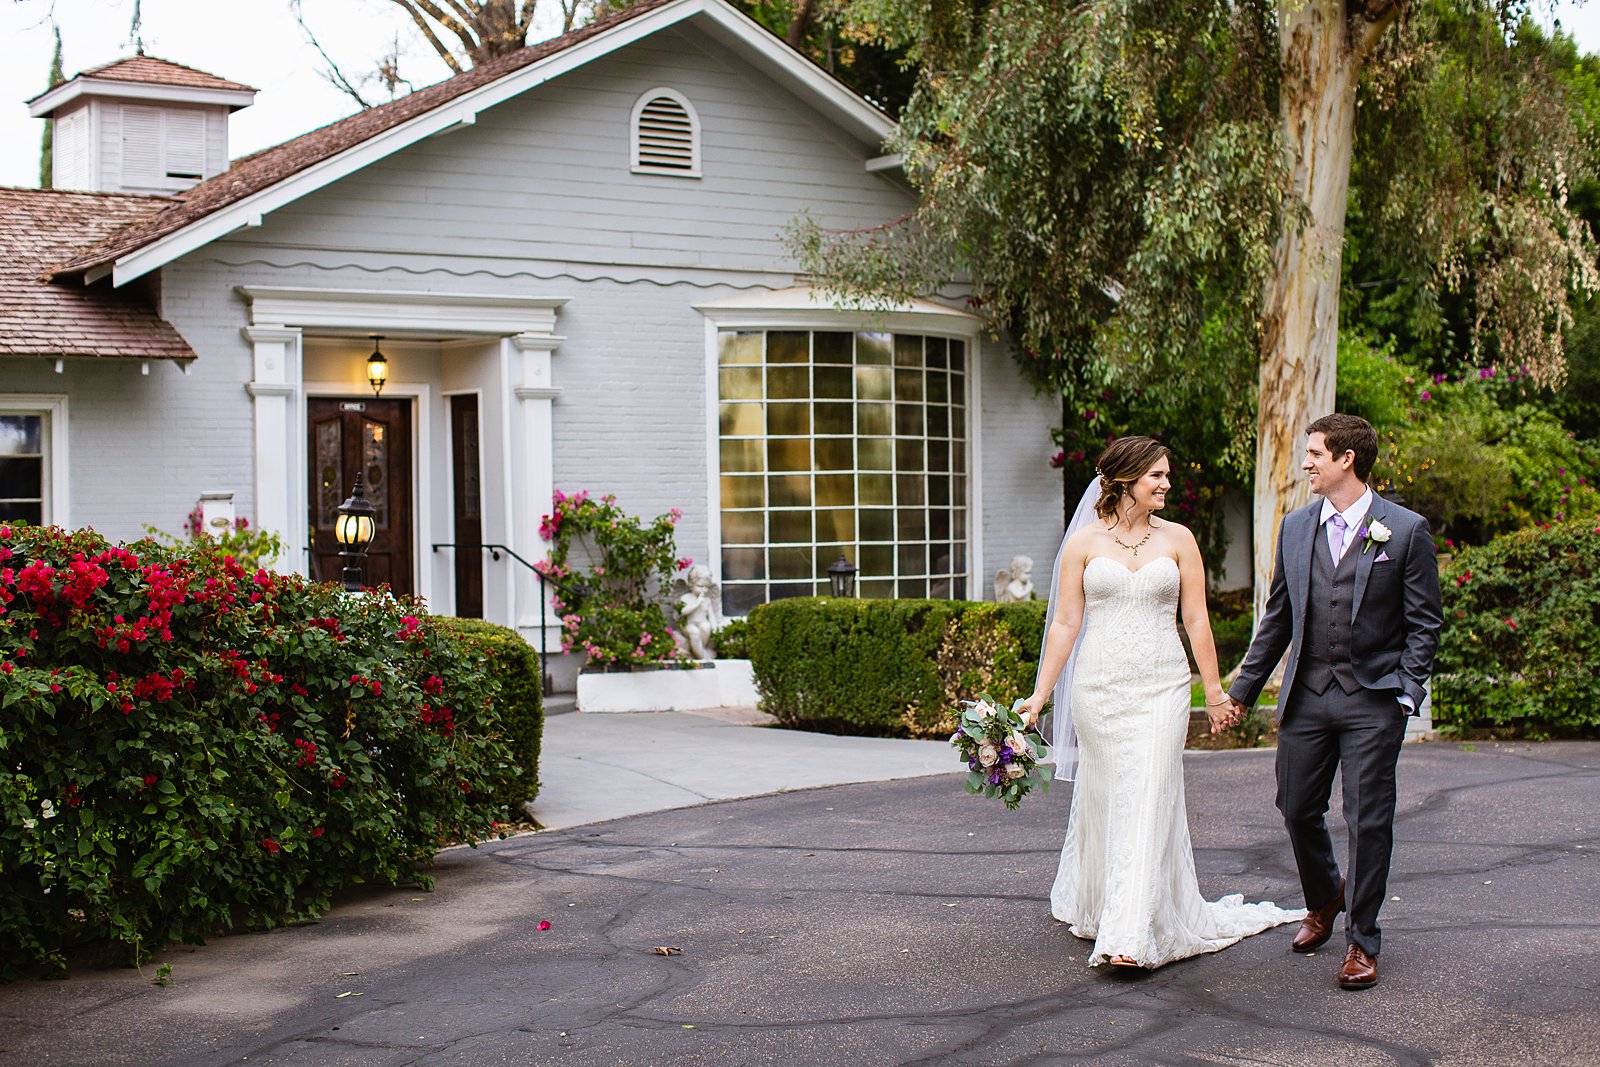 Bride and Groom walking together during their The Wright House wedding by Mesa wedding photographer PMA Photography.